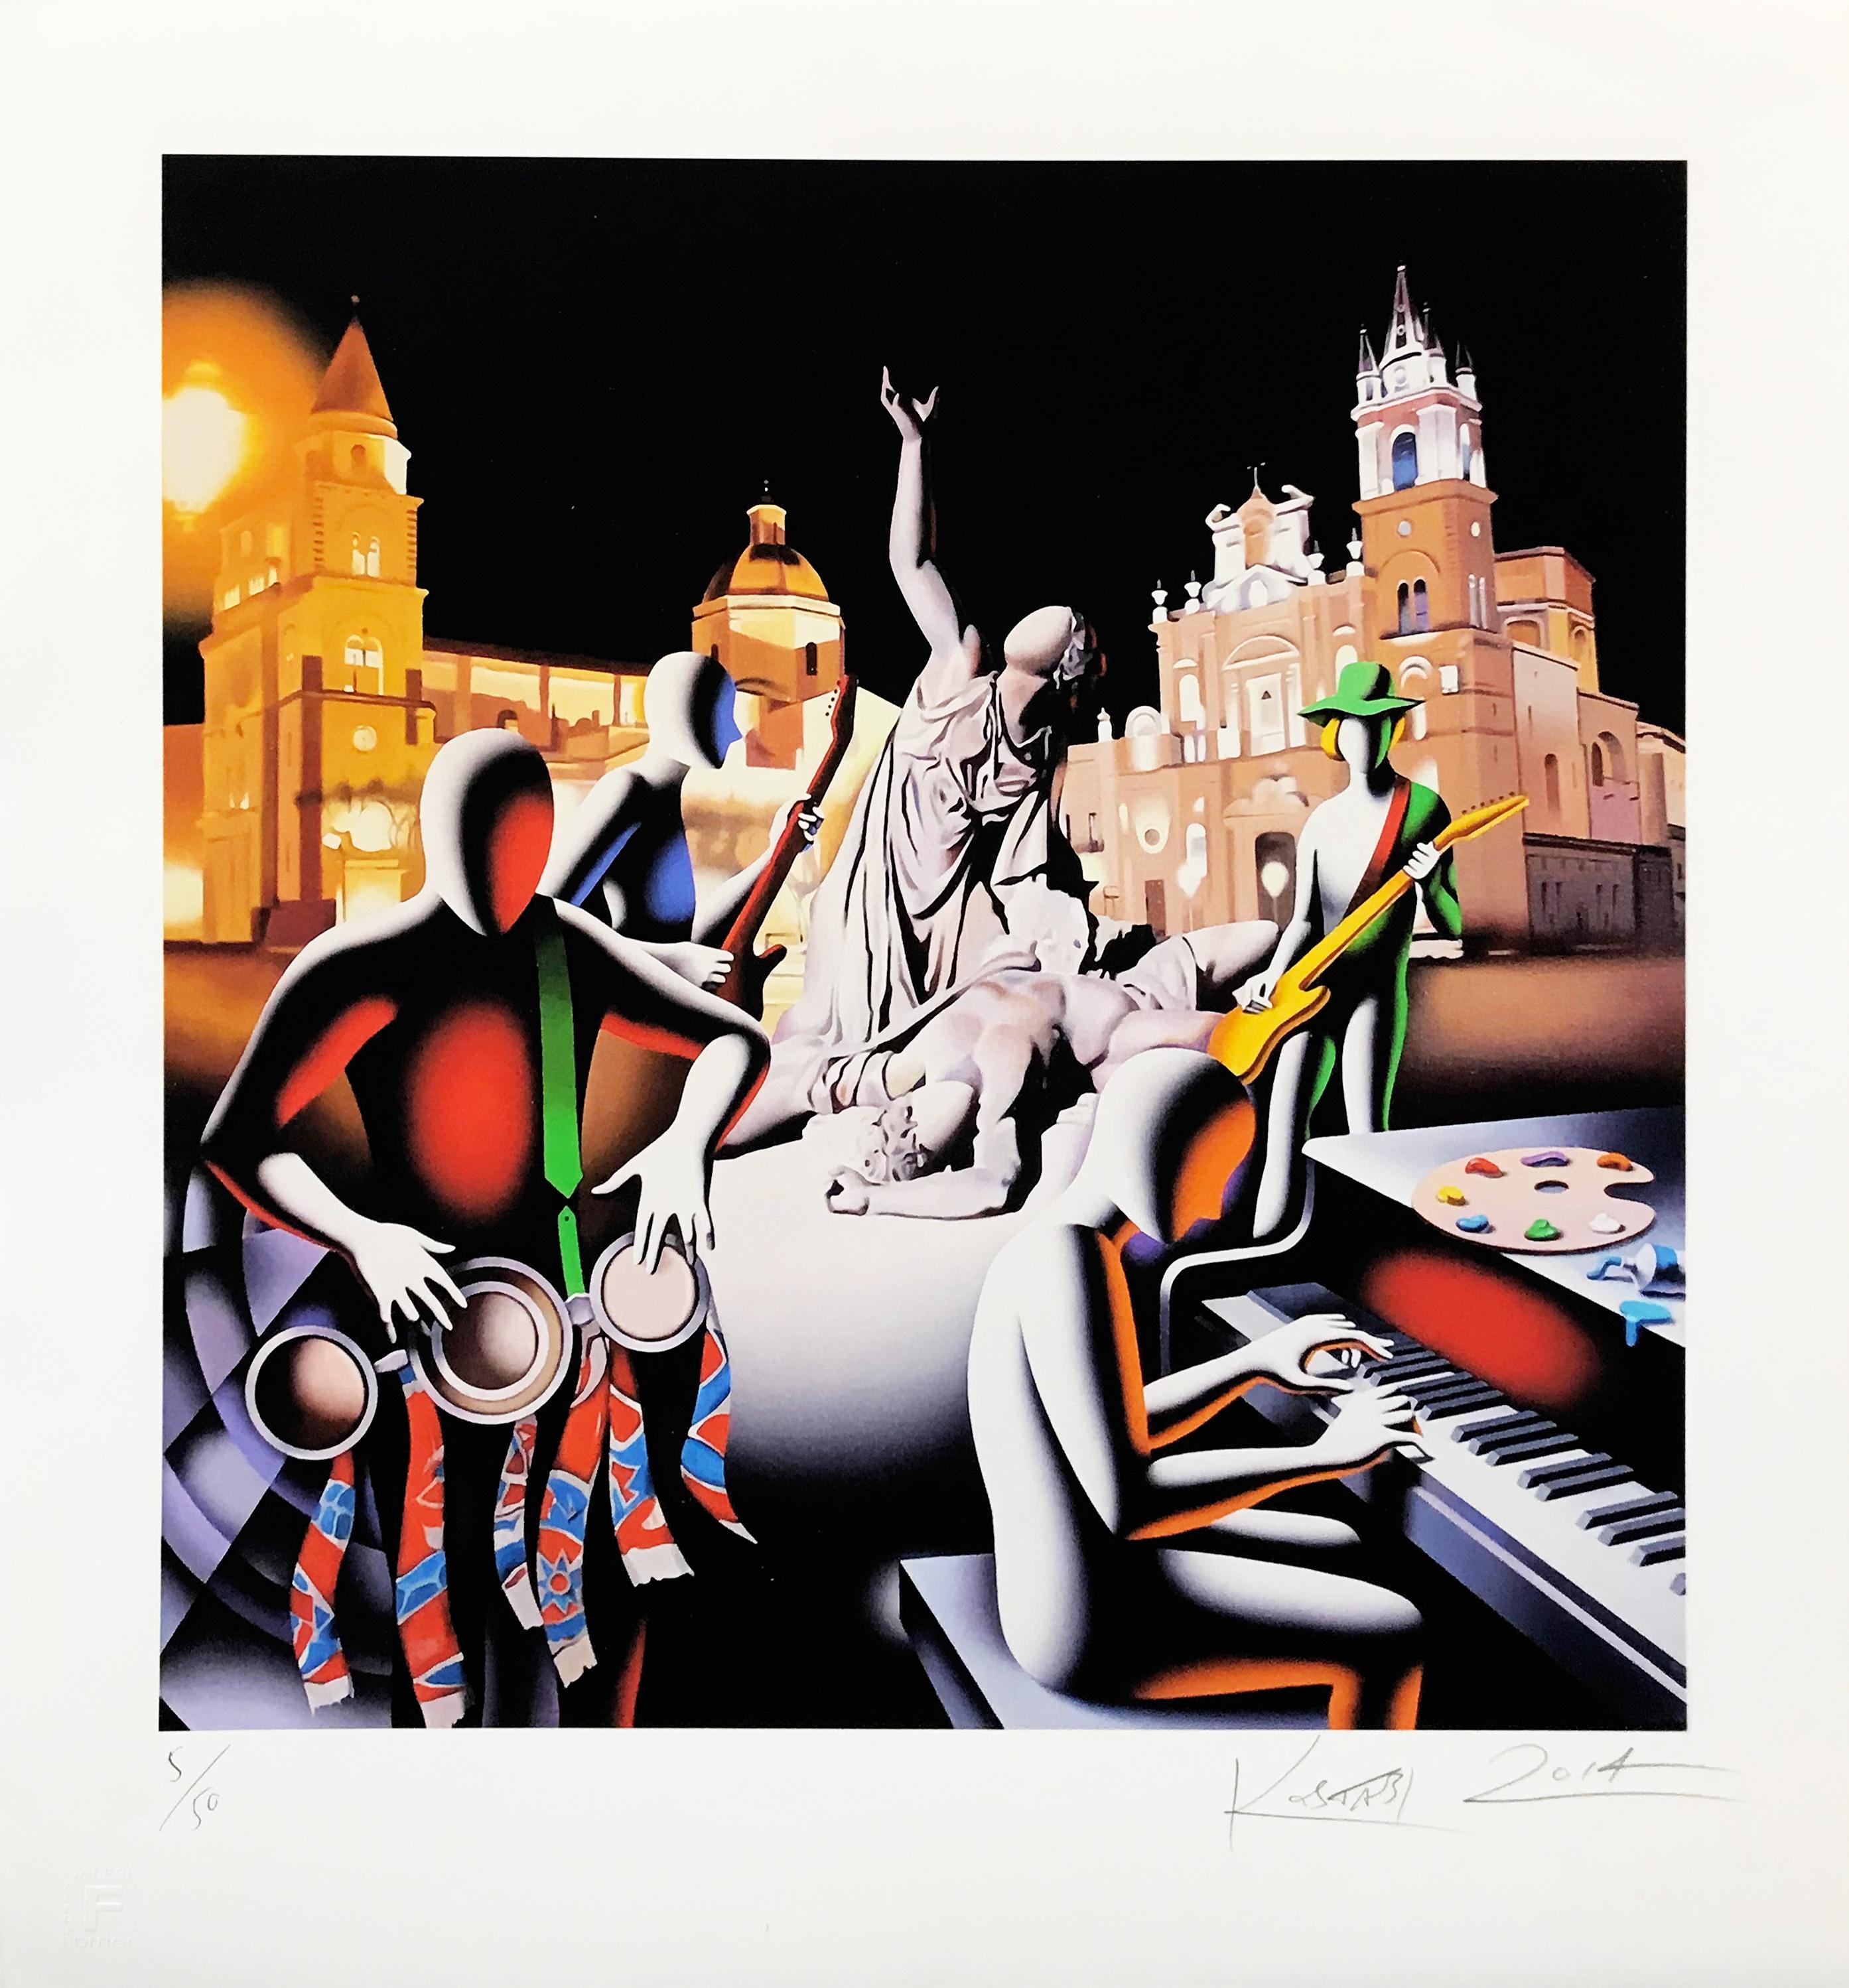 THE FIRST SET WAS IN STONE - Print by Mark Kostabi